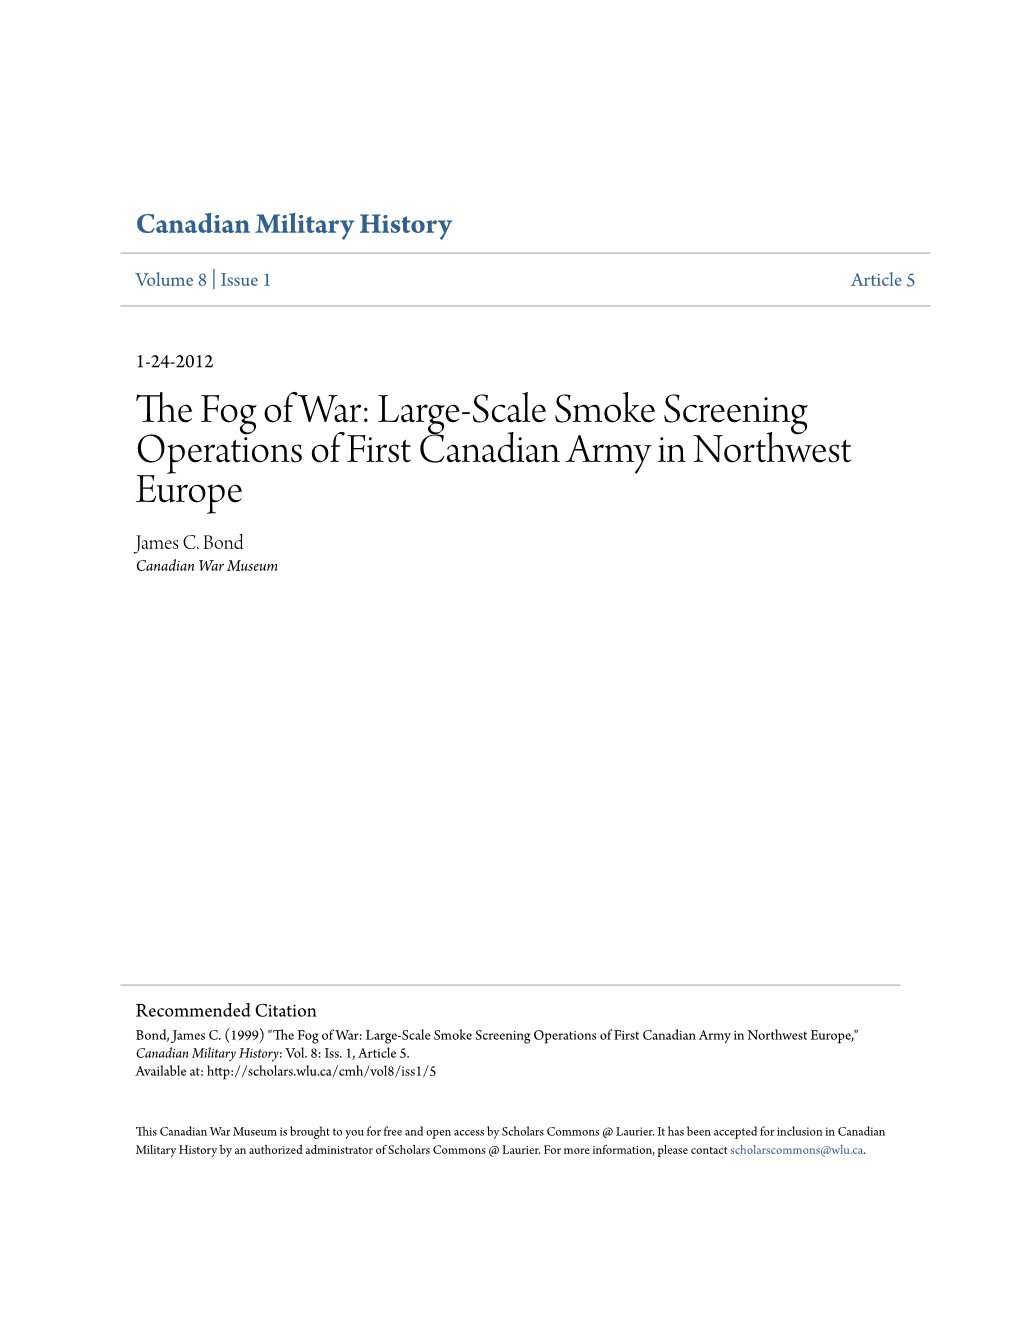 The Fog of War: Large-Scale Smoke Screening Operations of First C